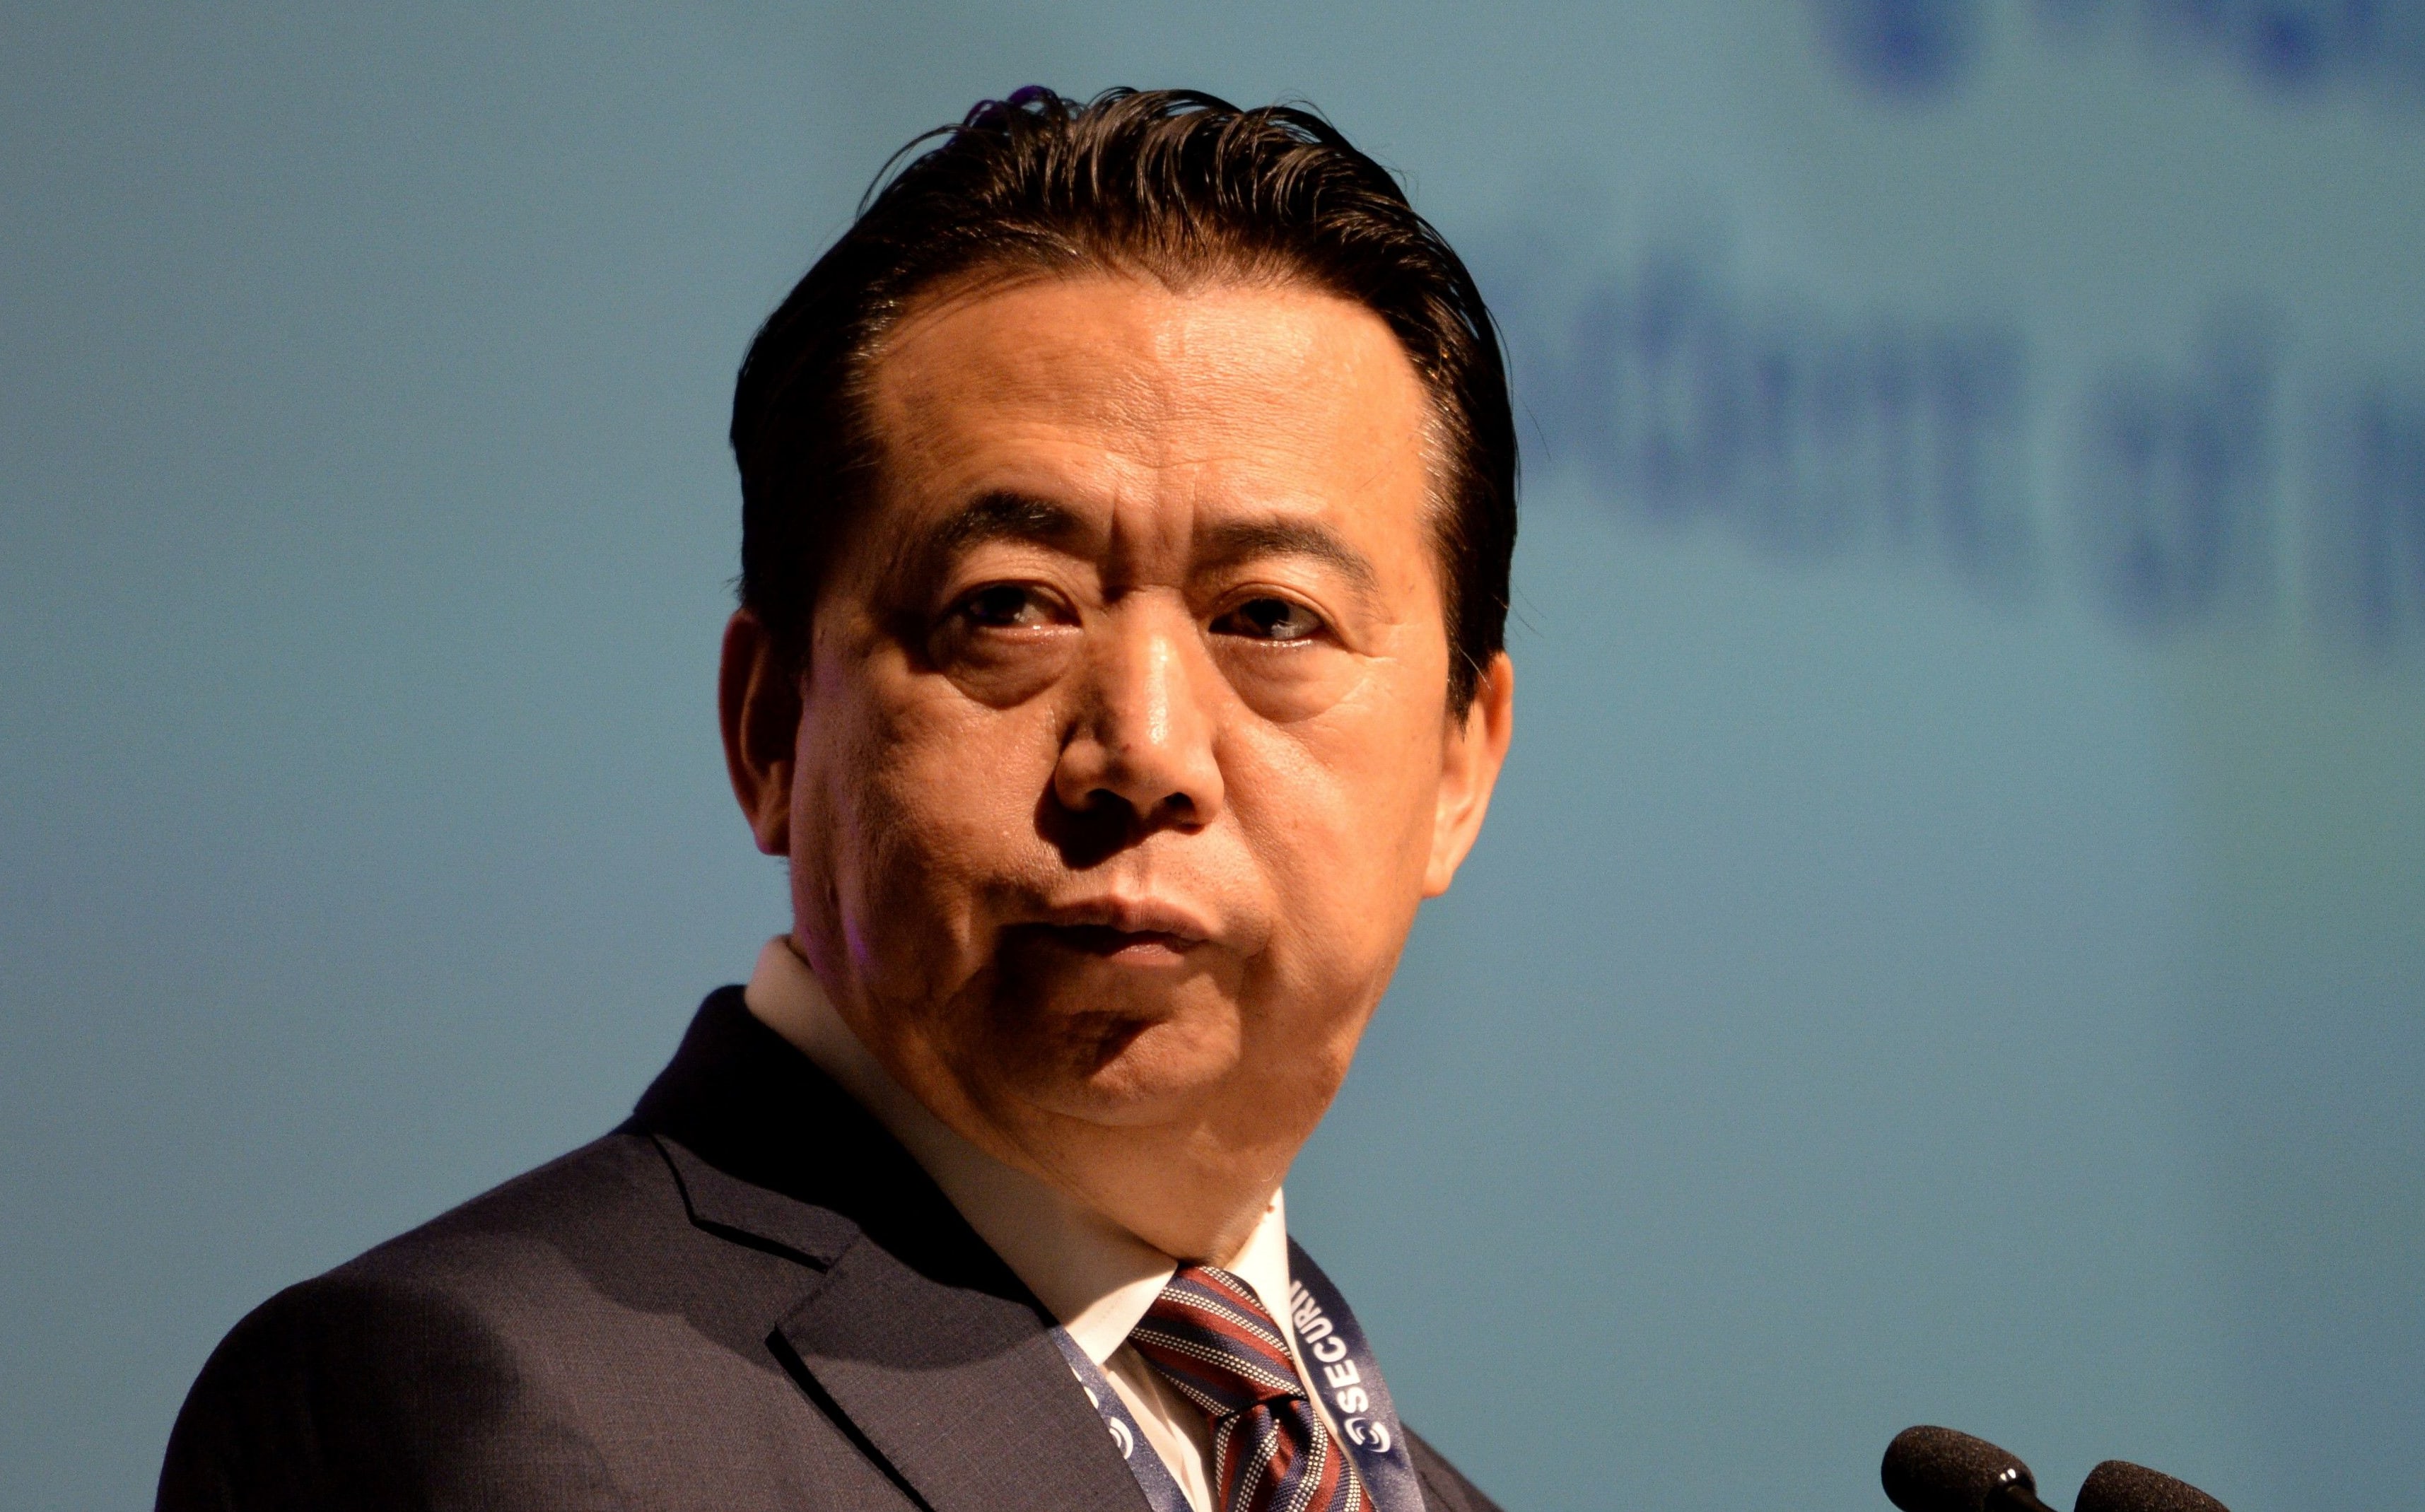 Interpol president Meng Hongwei gives an address at the opening of the Interpol World Congress in Singapore In July 2018.